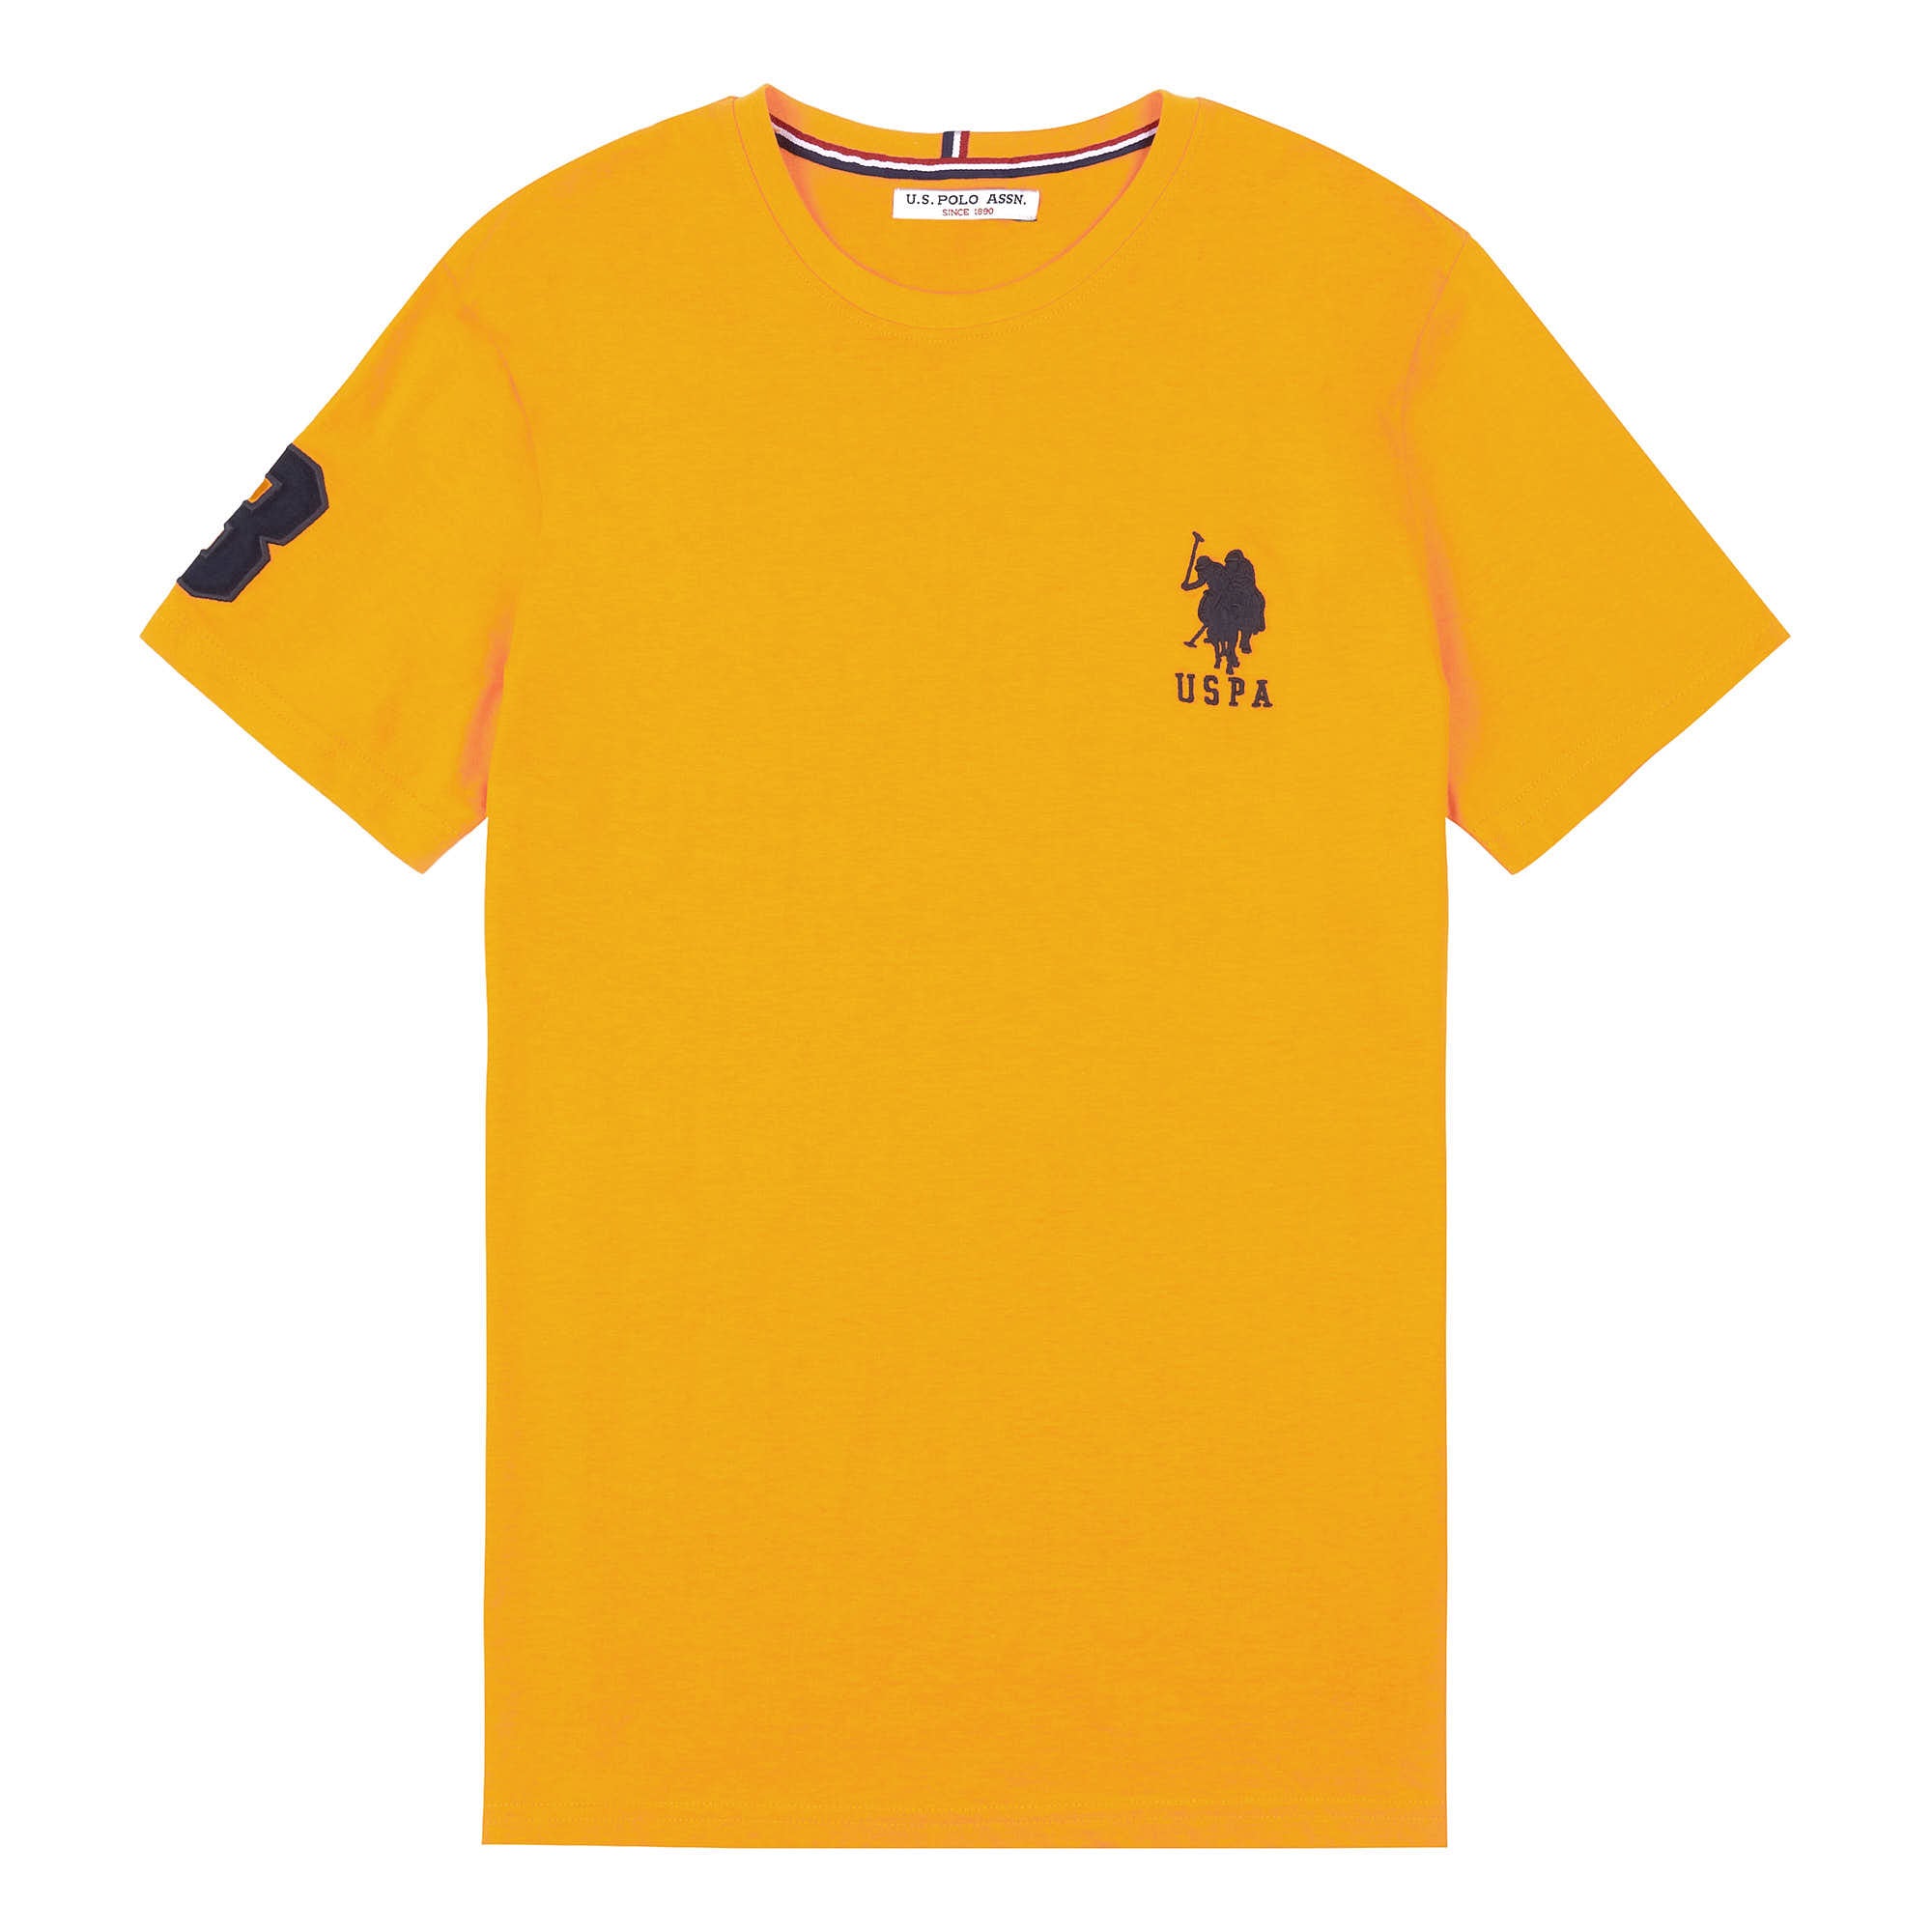 Mens Player 3 T-Shirt in Apricot